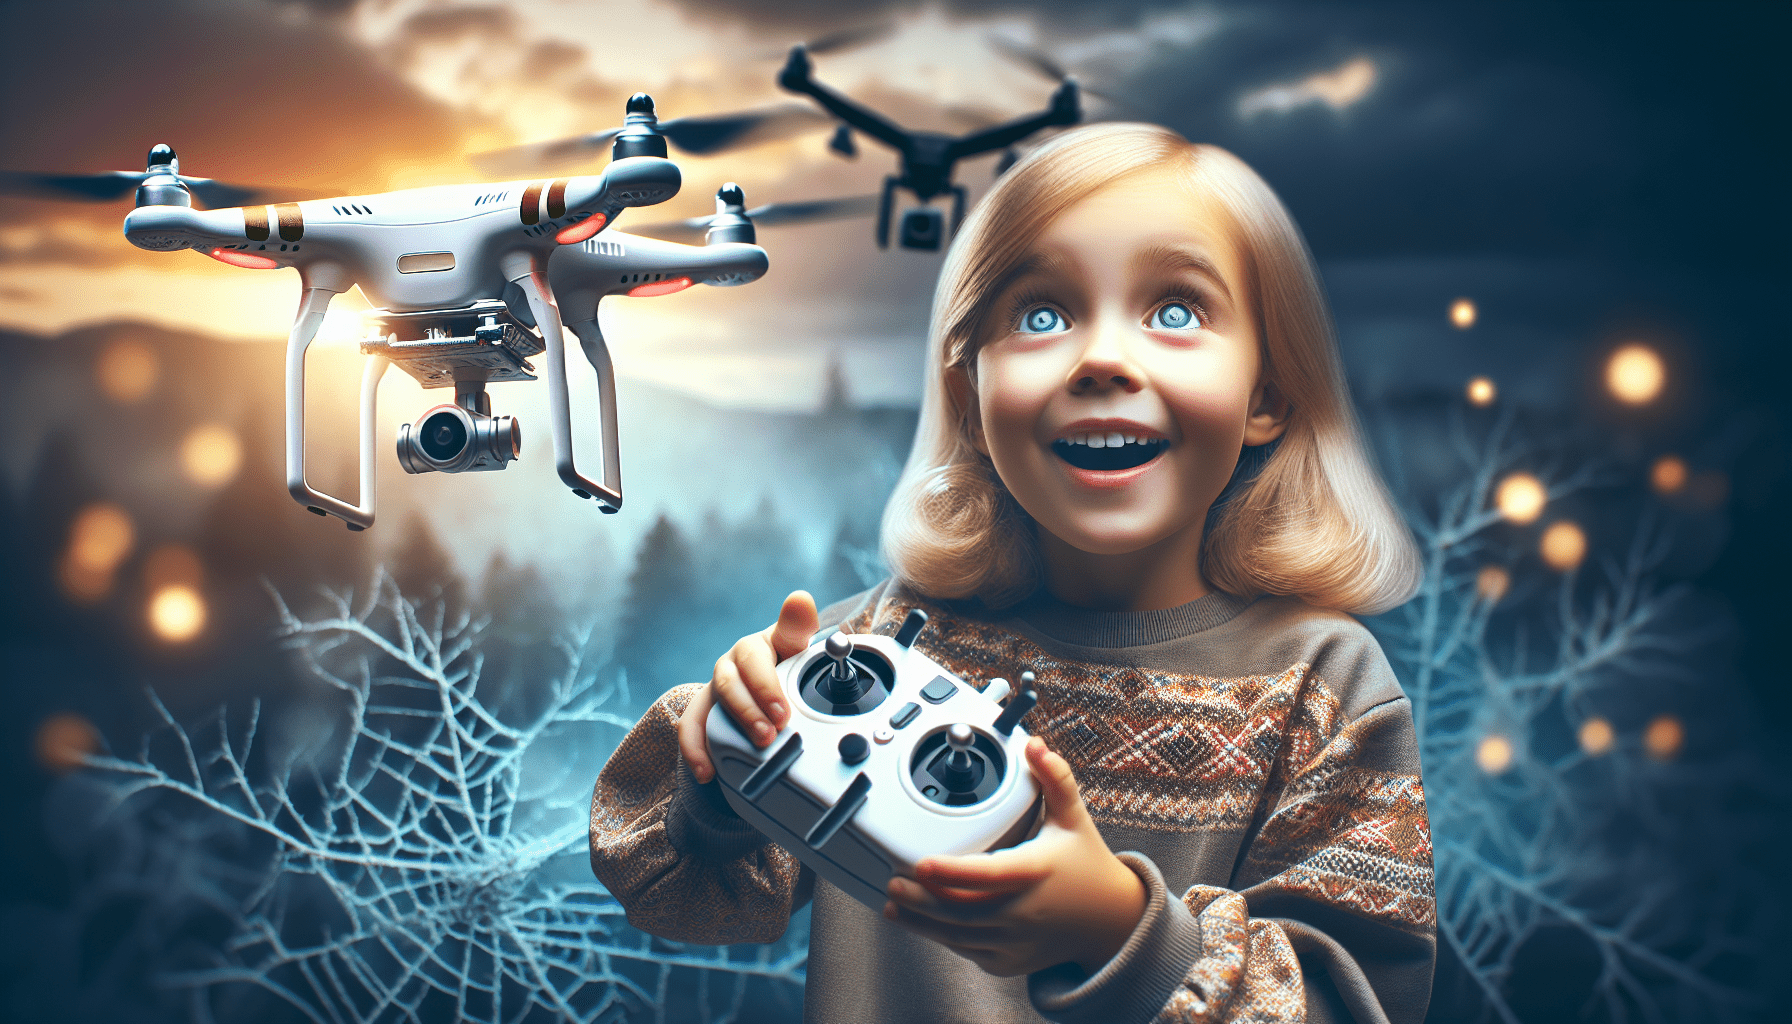 Can An 8 Year Old Use A Drone?